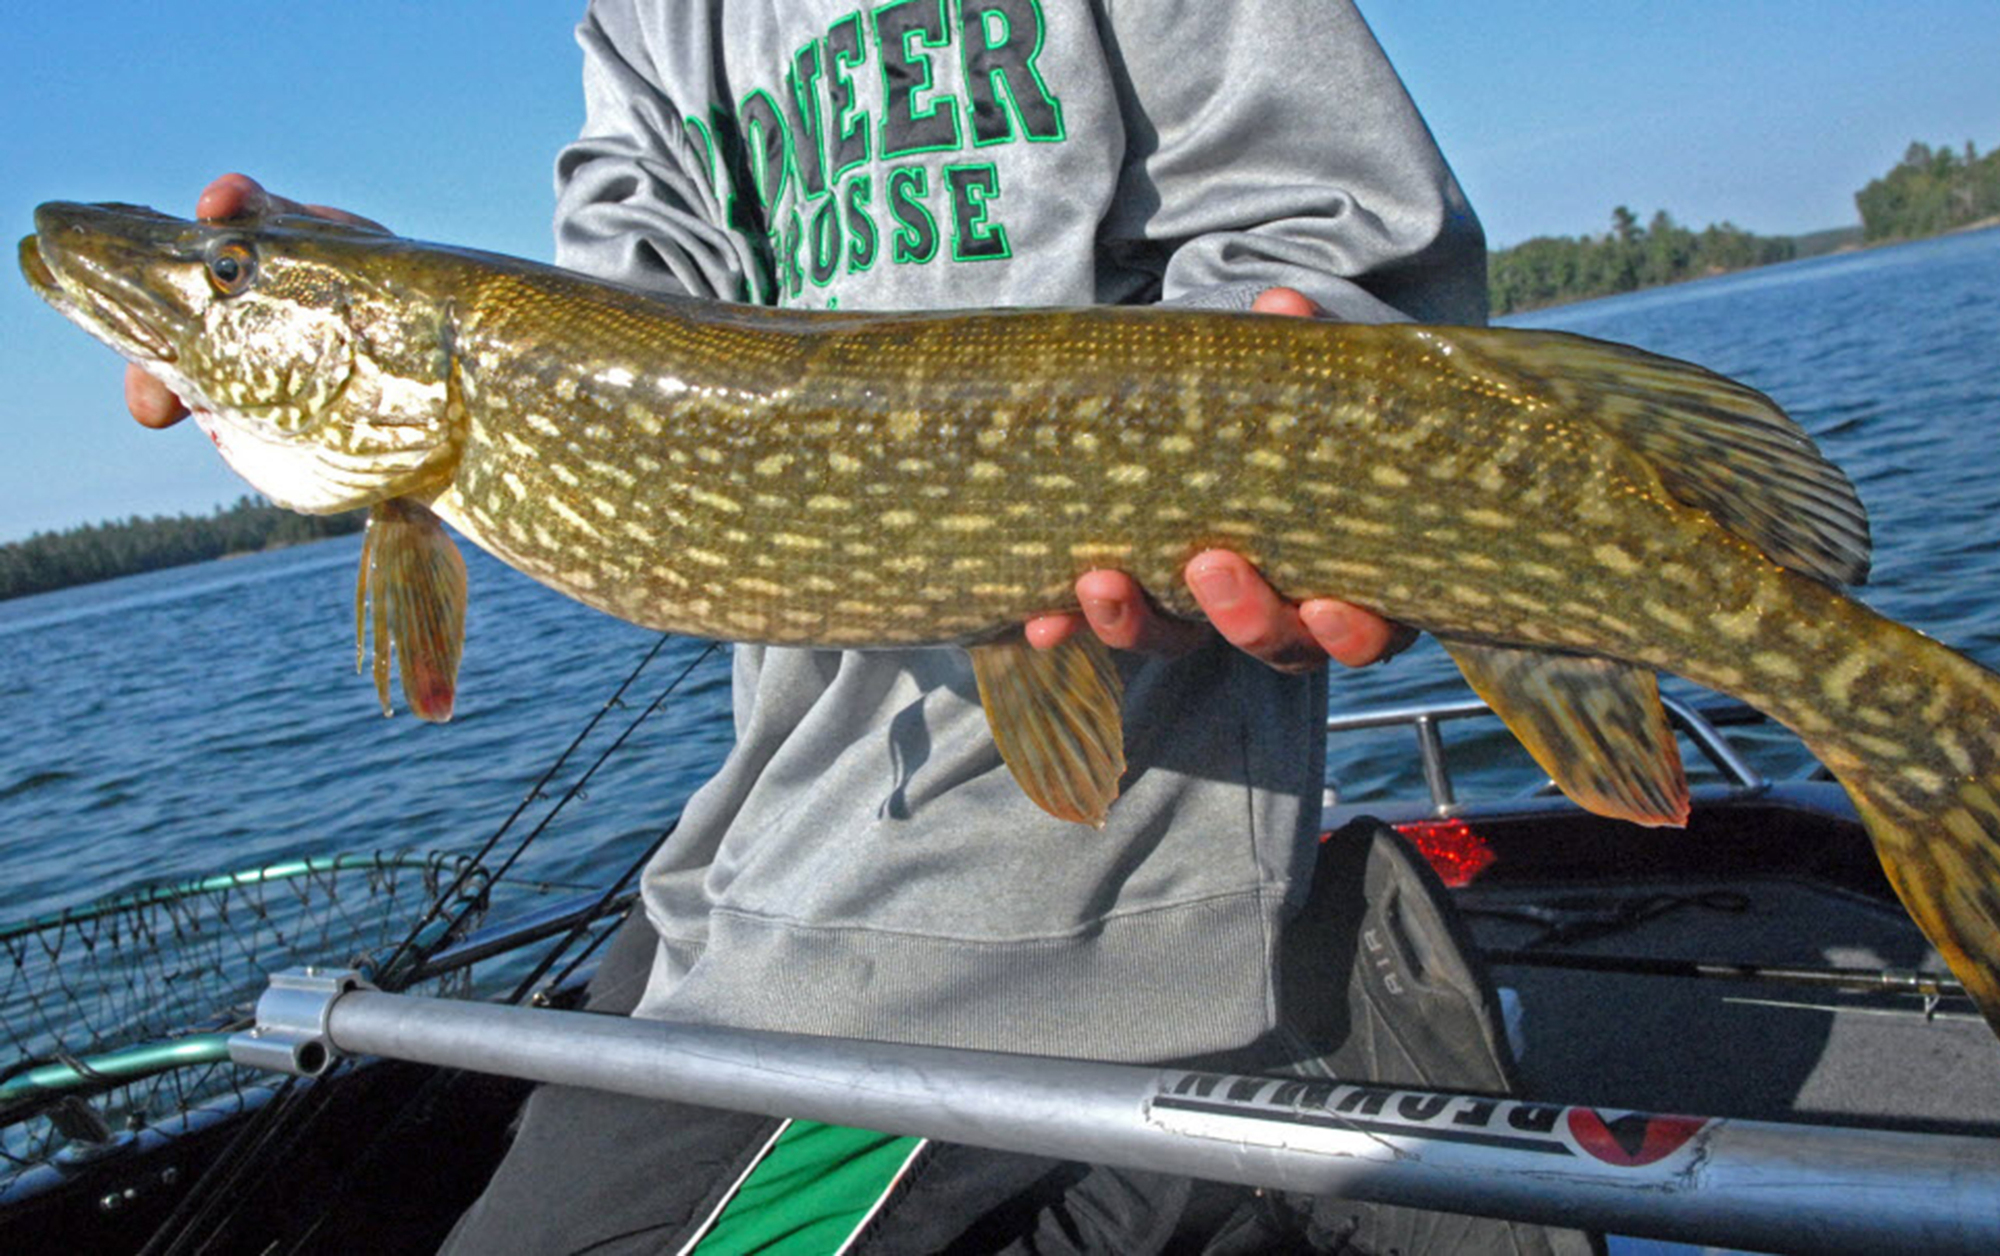 Why the zones? New regulations for keeping northern pike explained